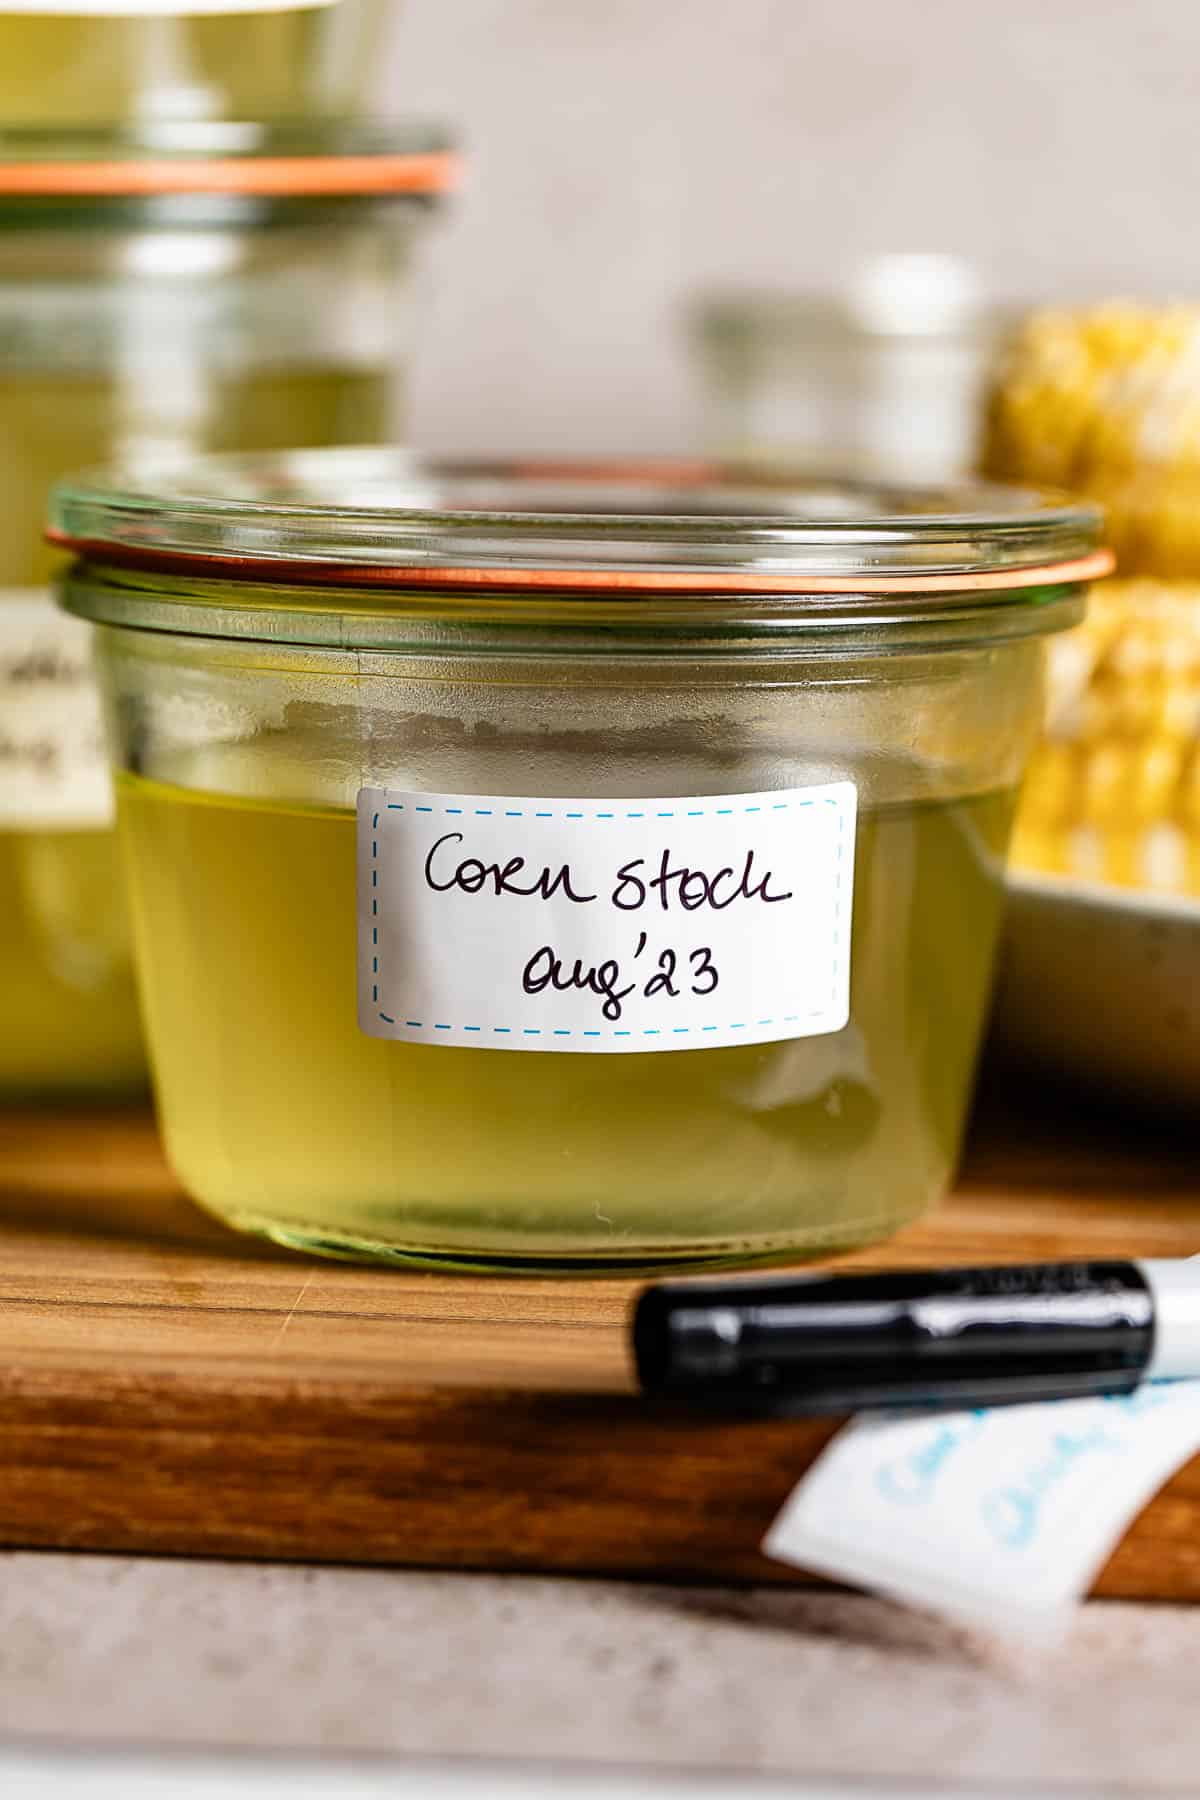 Corn cob soup stock in a jar dated and labeled.